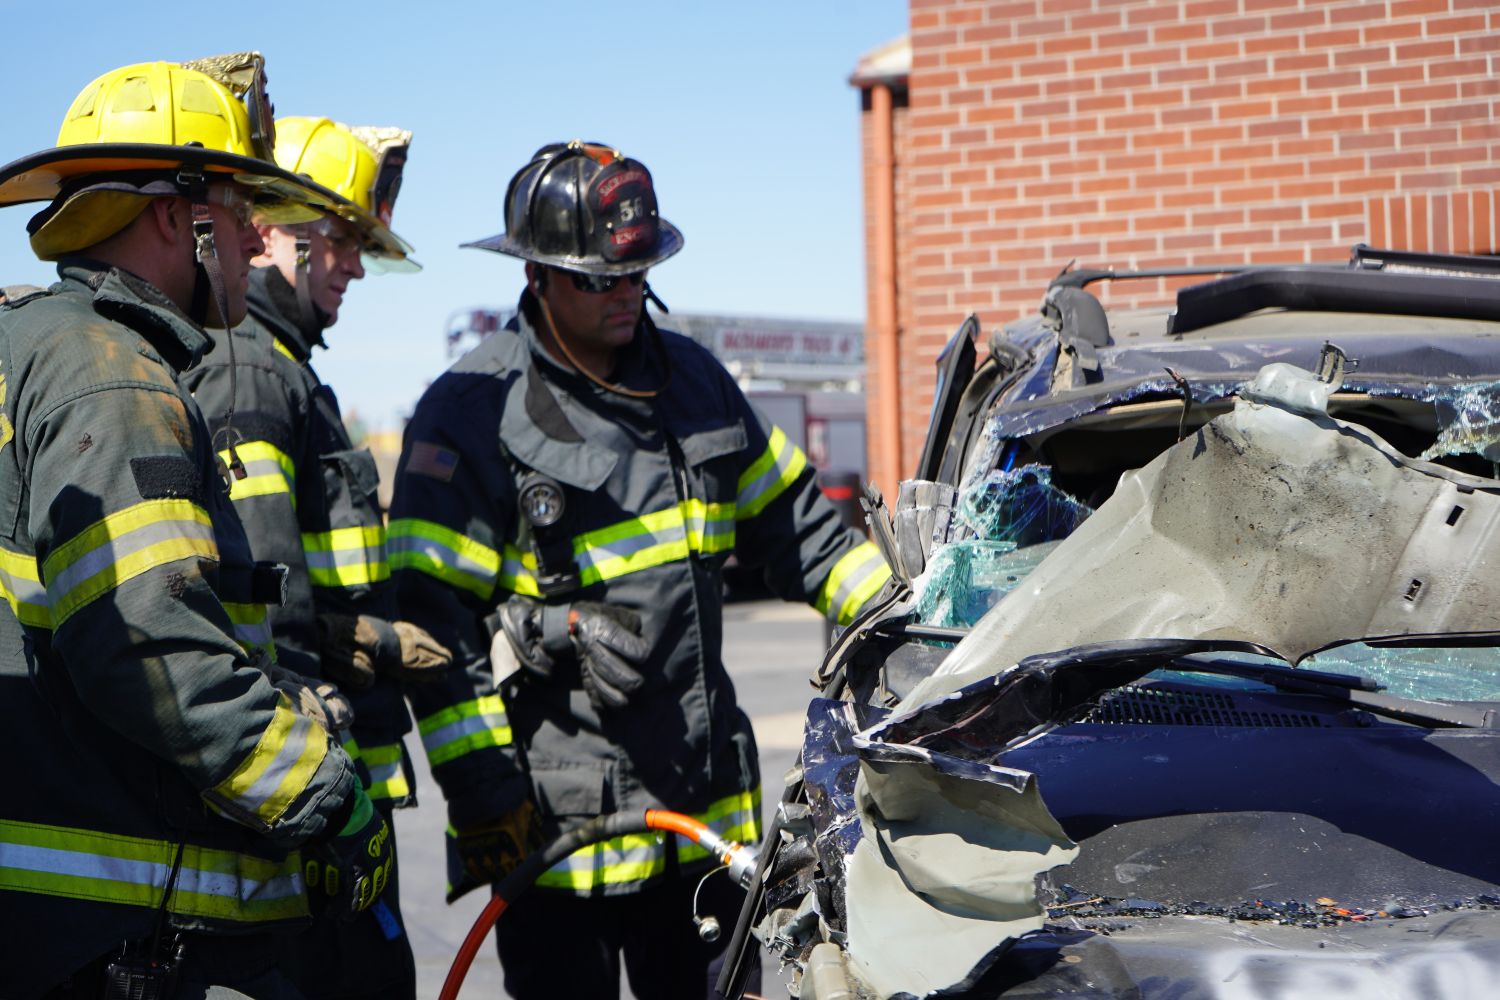 three firefighters looking at a wrecked vehicle in a training scenario 